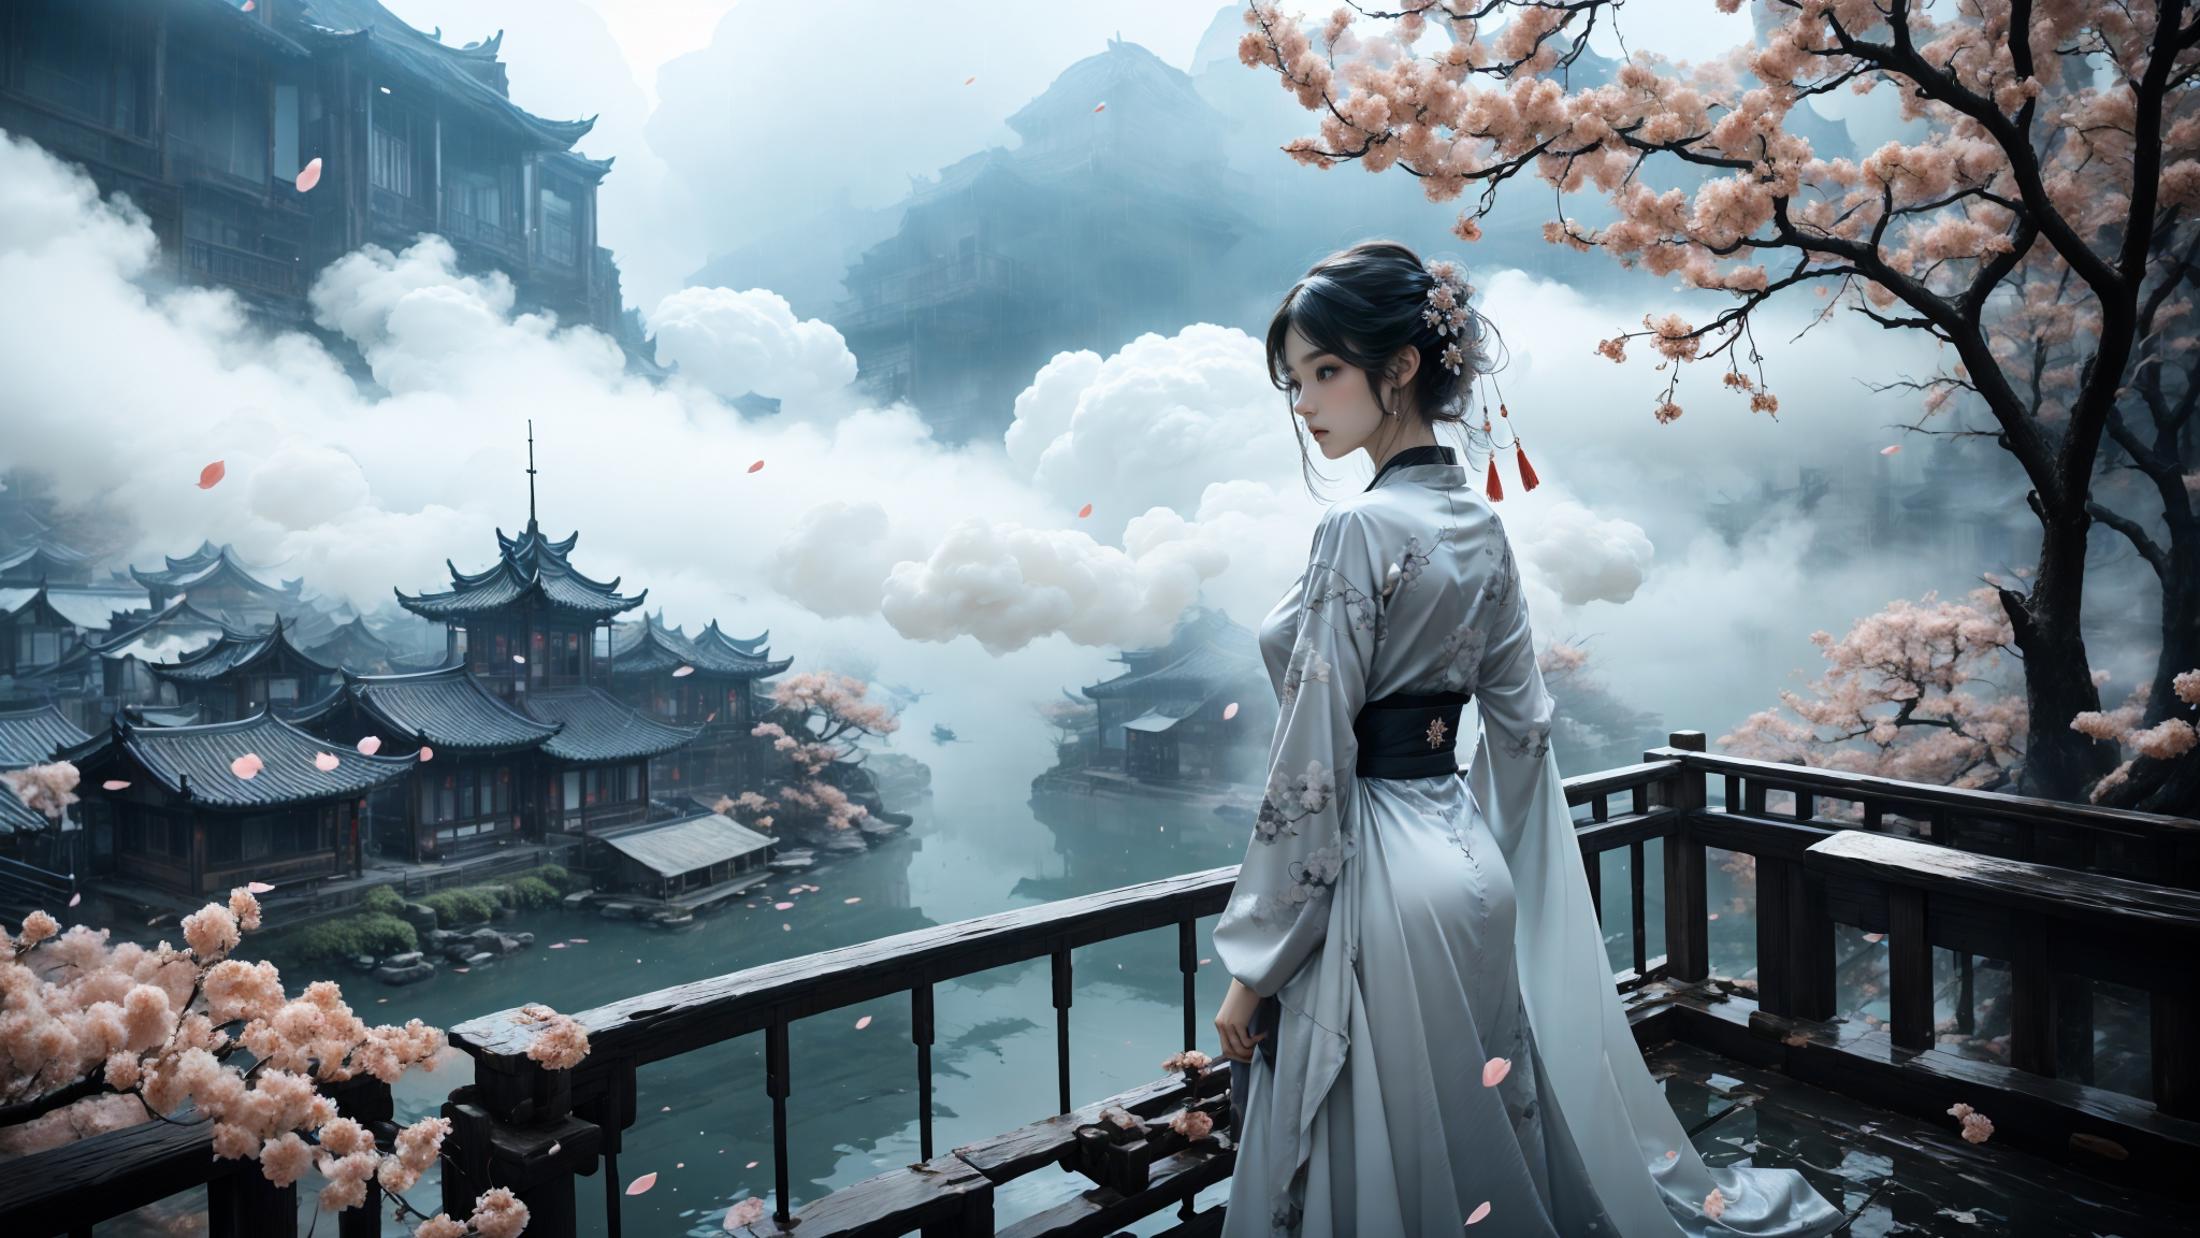 A woman in a flowing dress gazes over a beautiful Asian landscape.